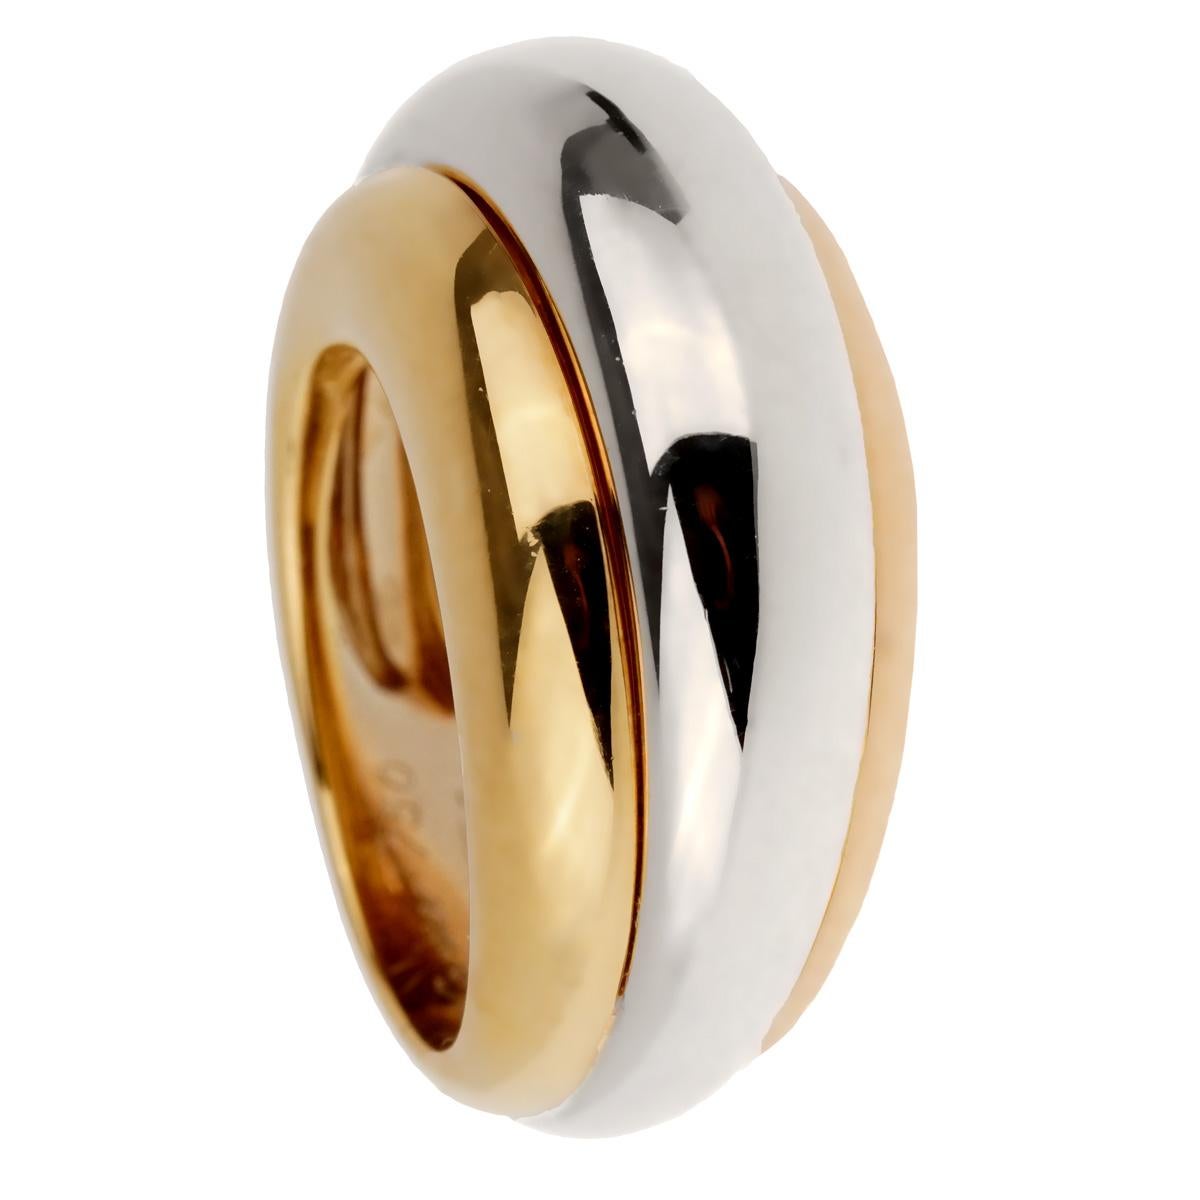 A rare Cartier ring from the Trinity collection circa 1990's showcasing white, yellow and rose gold in 18k yellow gold. Size 52 / 6 1/4